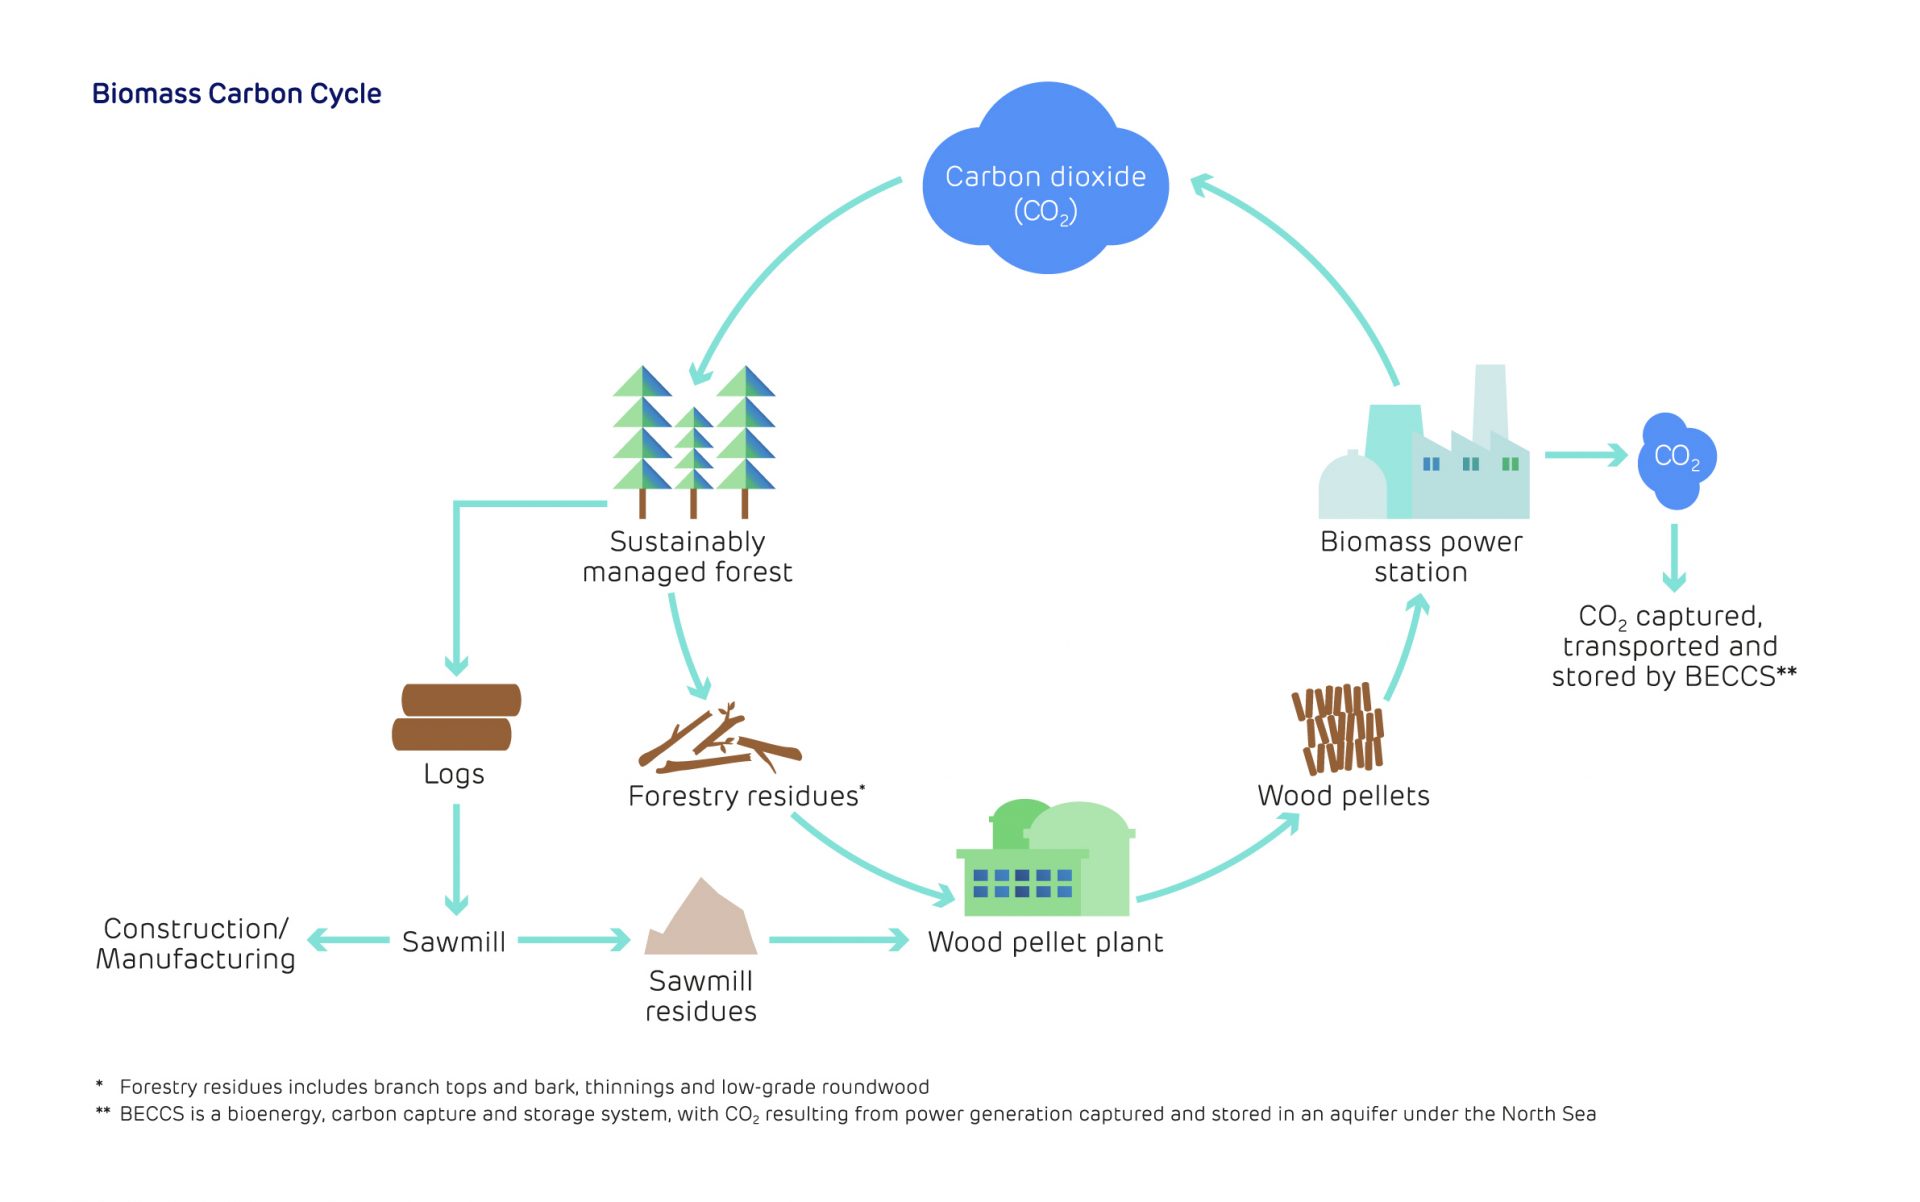 Biomass carbon cycle illustration (for web)